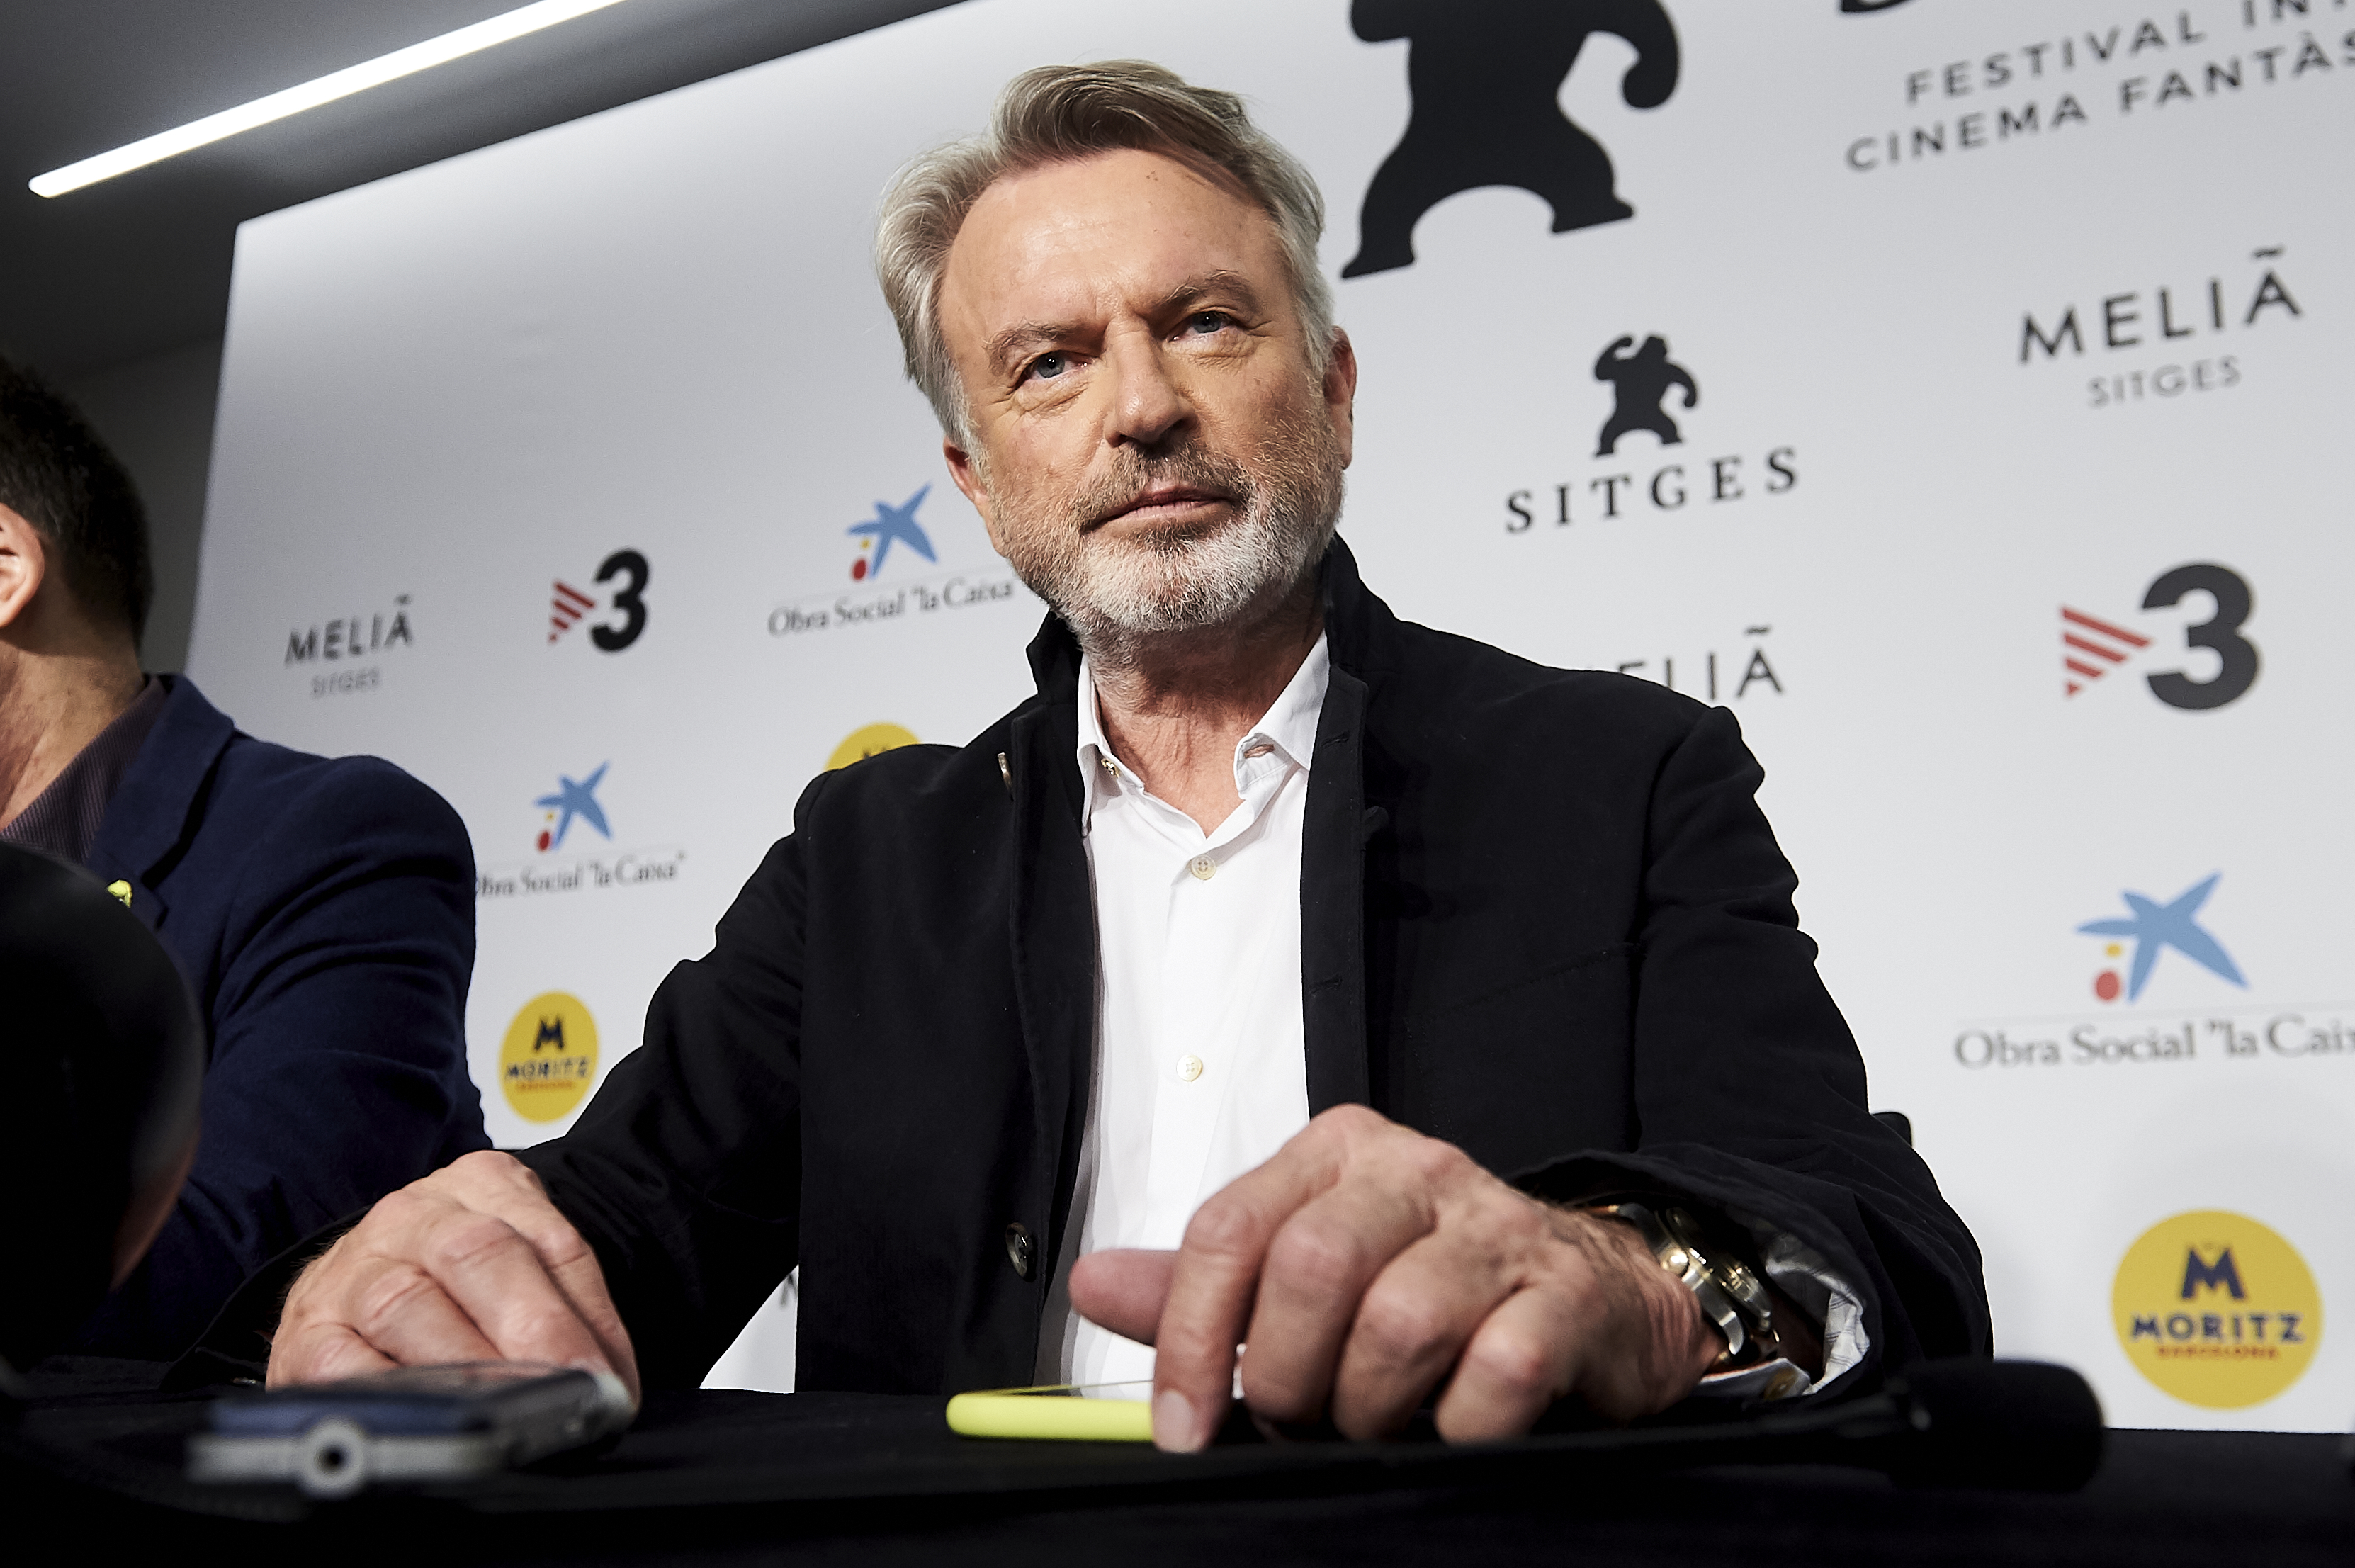 Actor Sam Neill attends a press conference during day 9 of the 52nd edition of the Sitges Fantastic Film Festival on October 11, 2019 in Sitges, Spain | Source: Getty Images